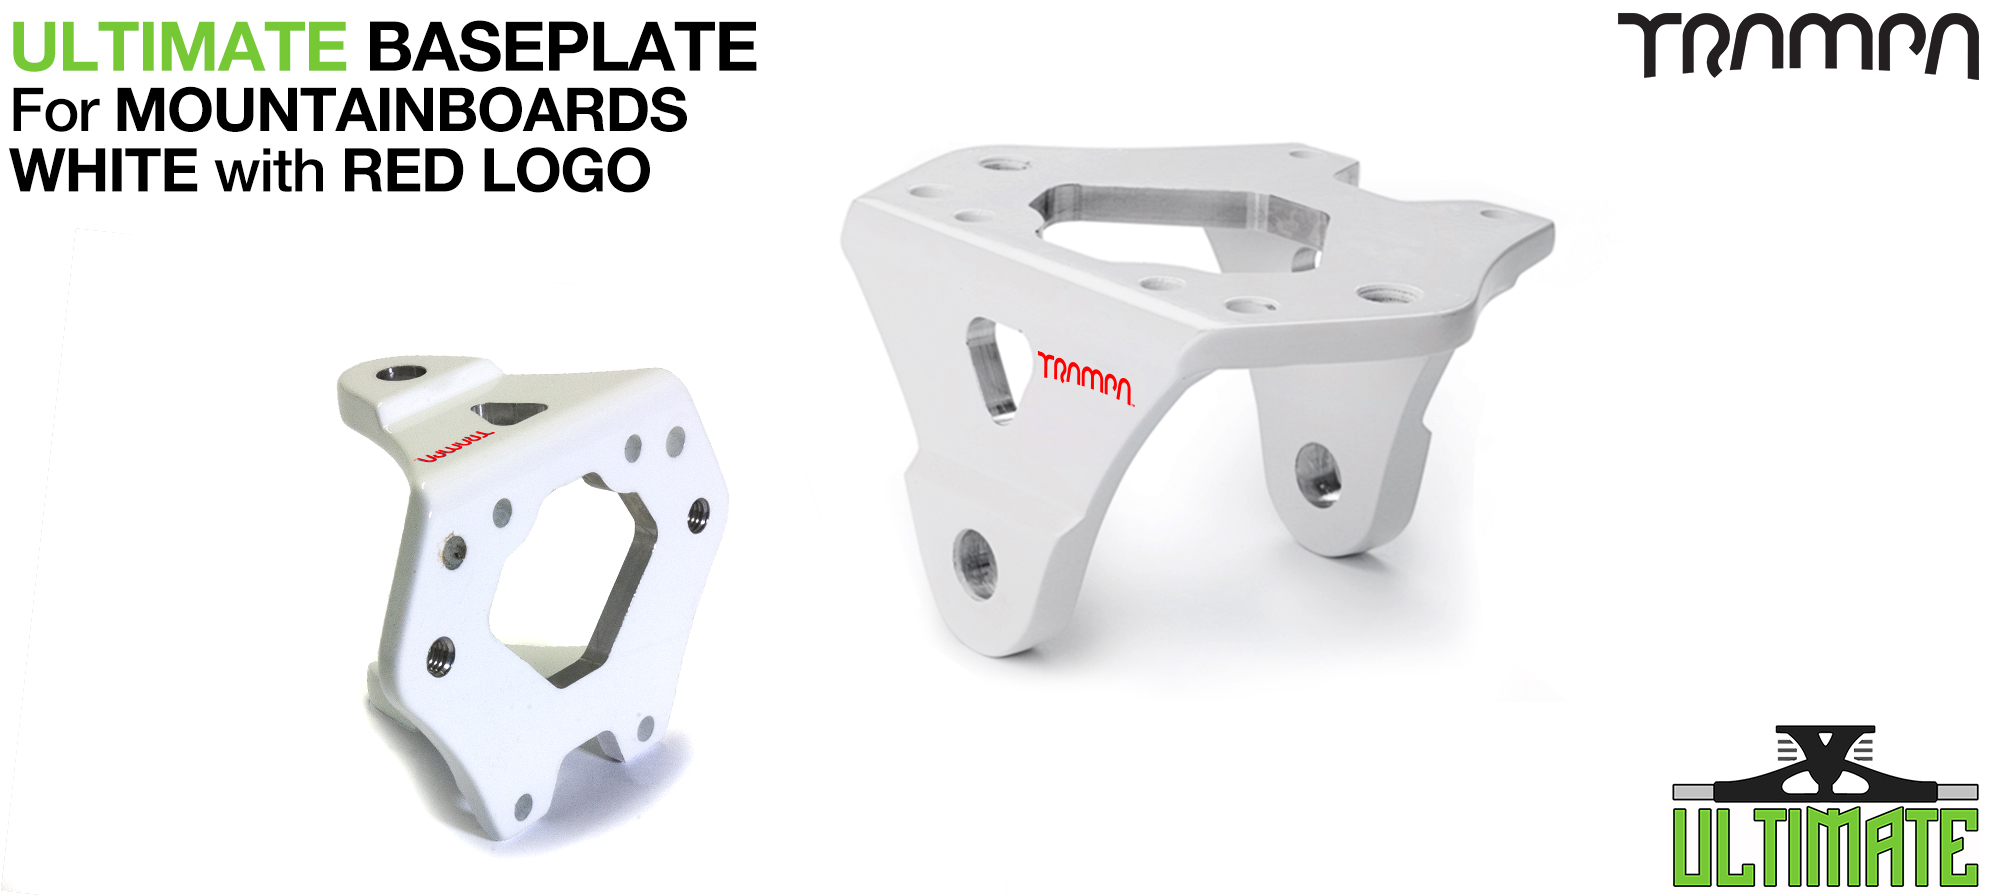 WHITE with RED logo Baseplate 